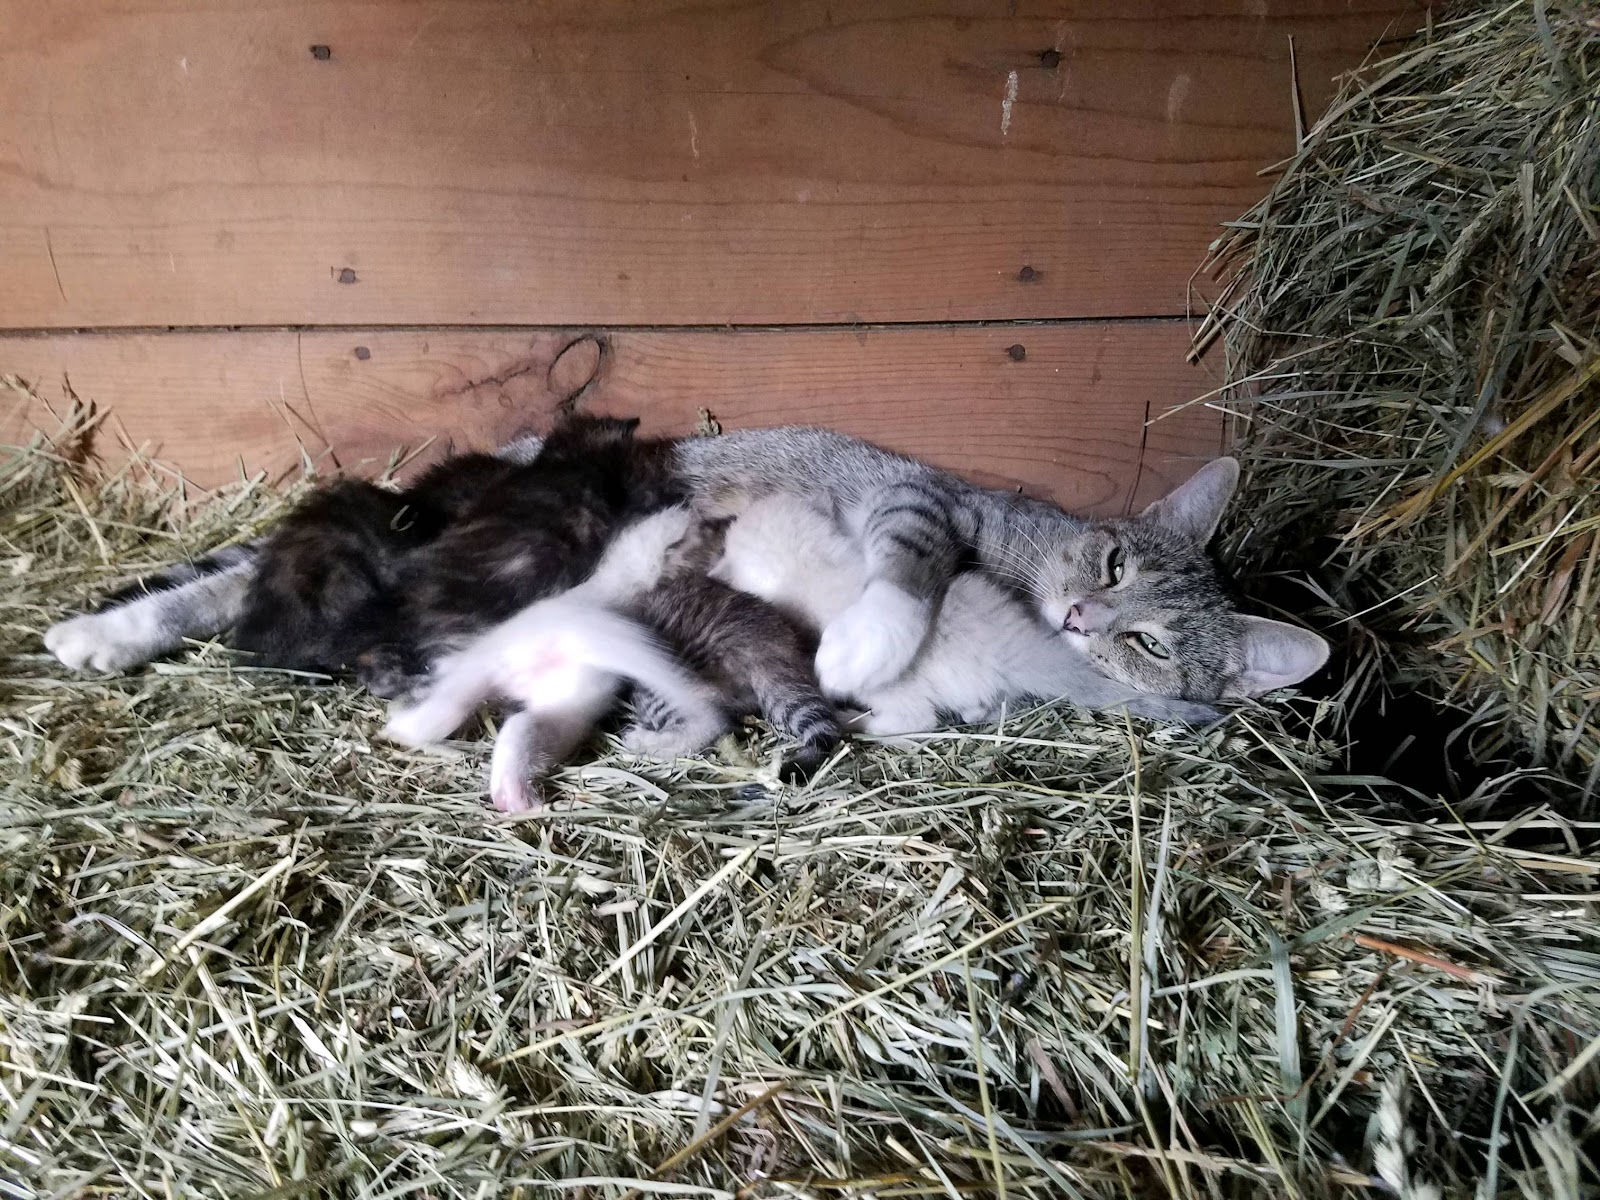 Susan happily feed her kittens on a bale of hay.